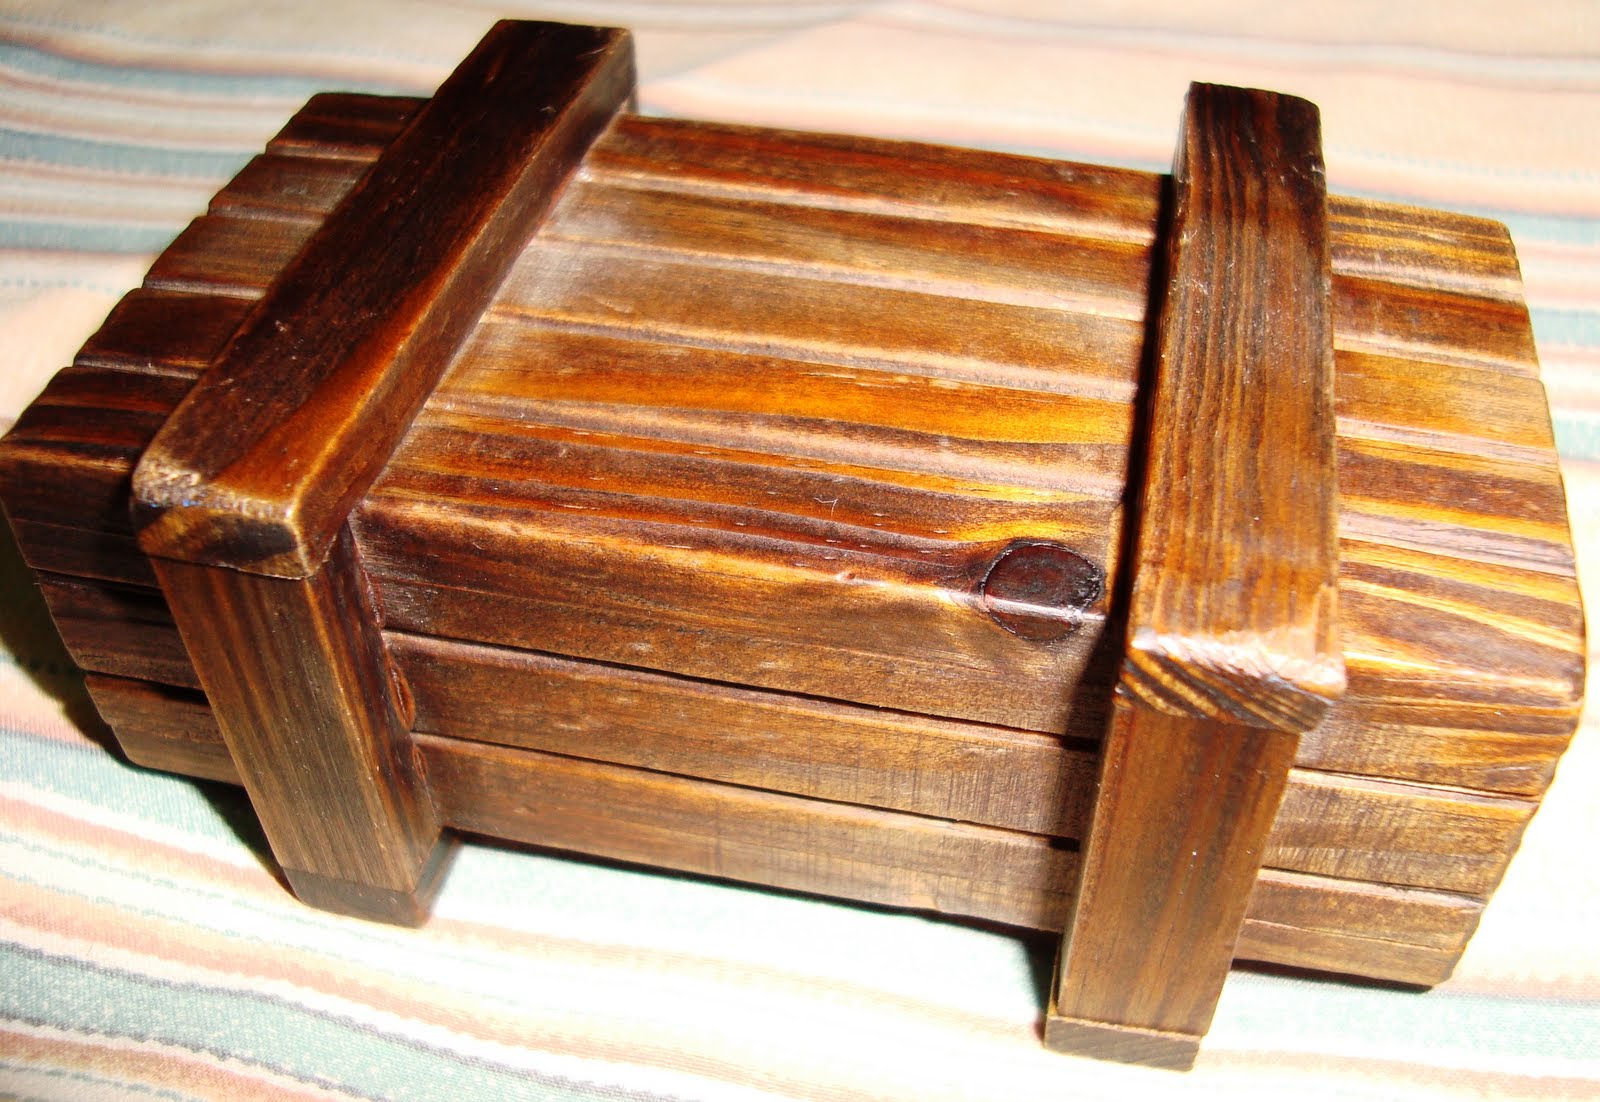  puzzle after entanglement puzzles a puzzle box also called a secret or